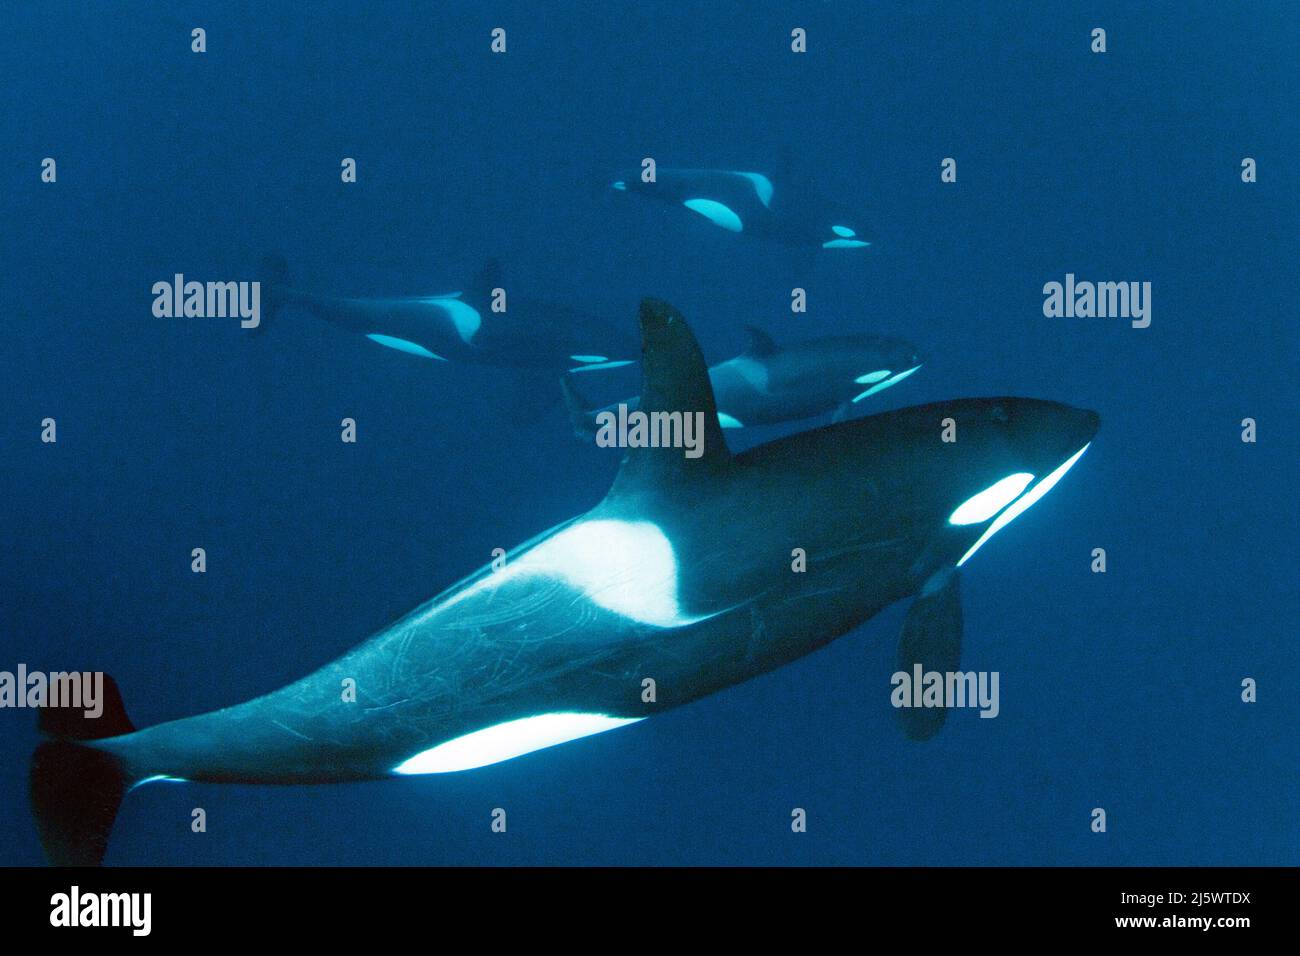 A group Orcas, killer whales (Orcinus orca) under water, Tromso, Norway, North-Atlantic Ocean, Europe Stock Photo